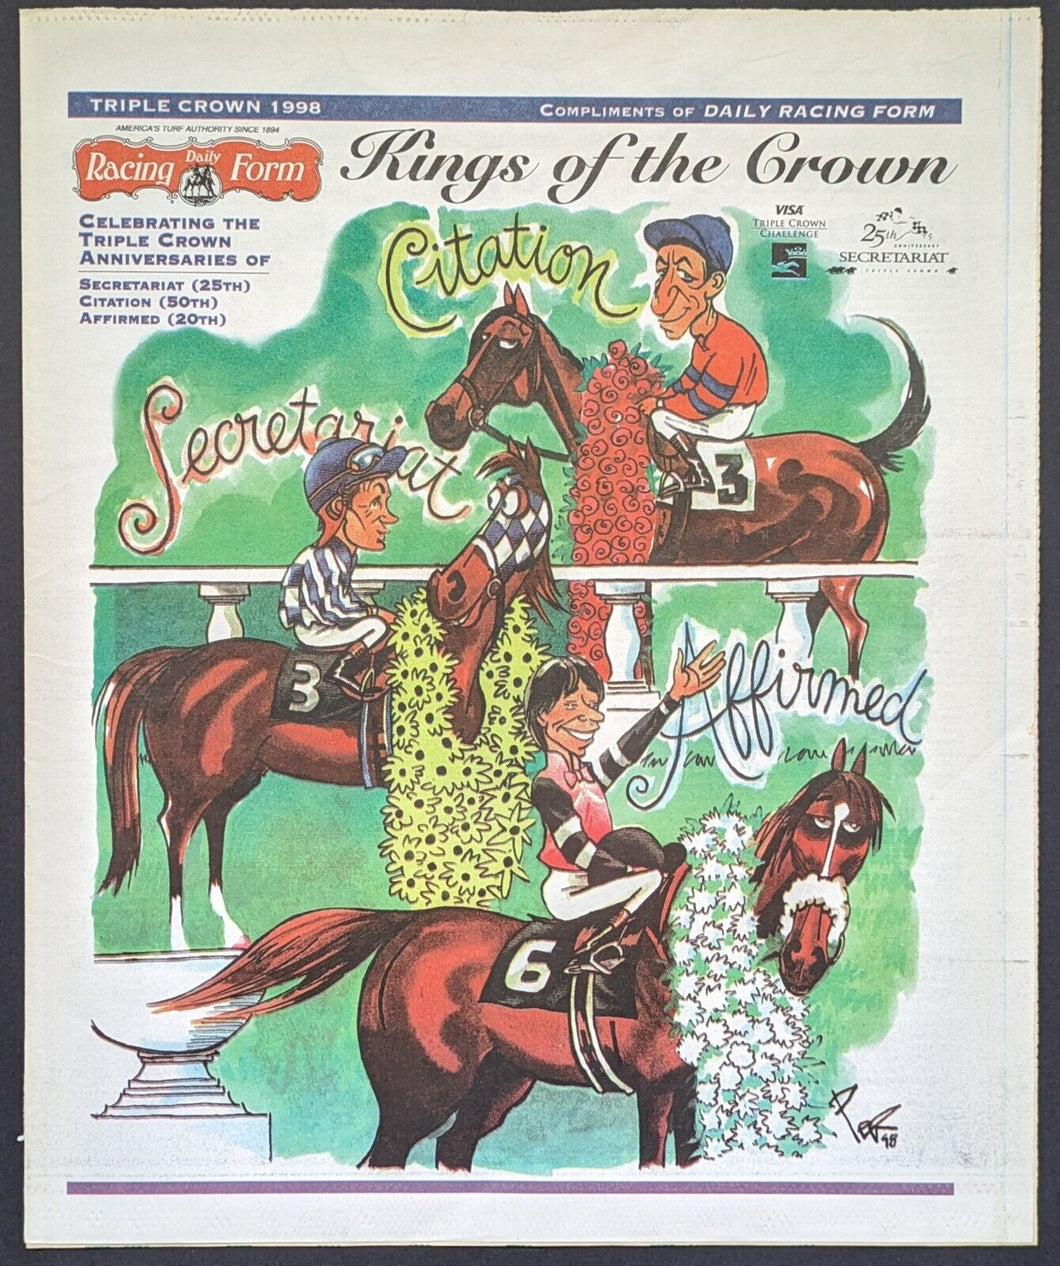 1998 Special Racing Daily Form Secretariat 25th Anniversery Citation Affirmed